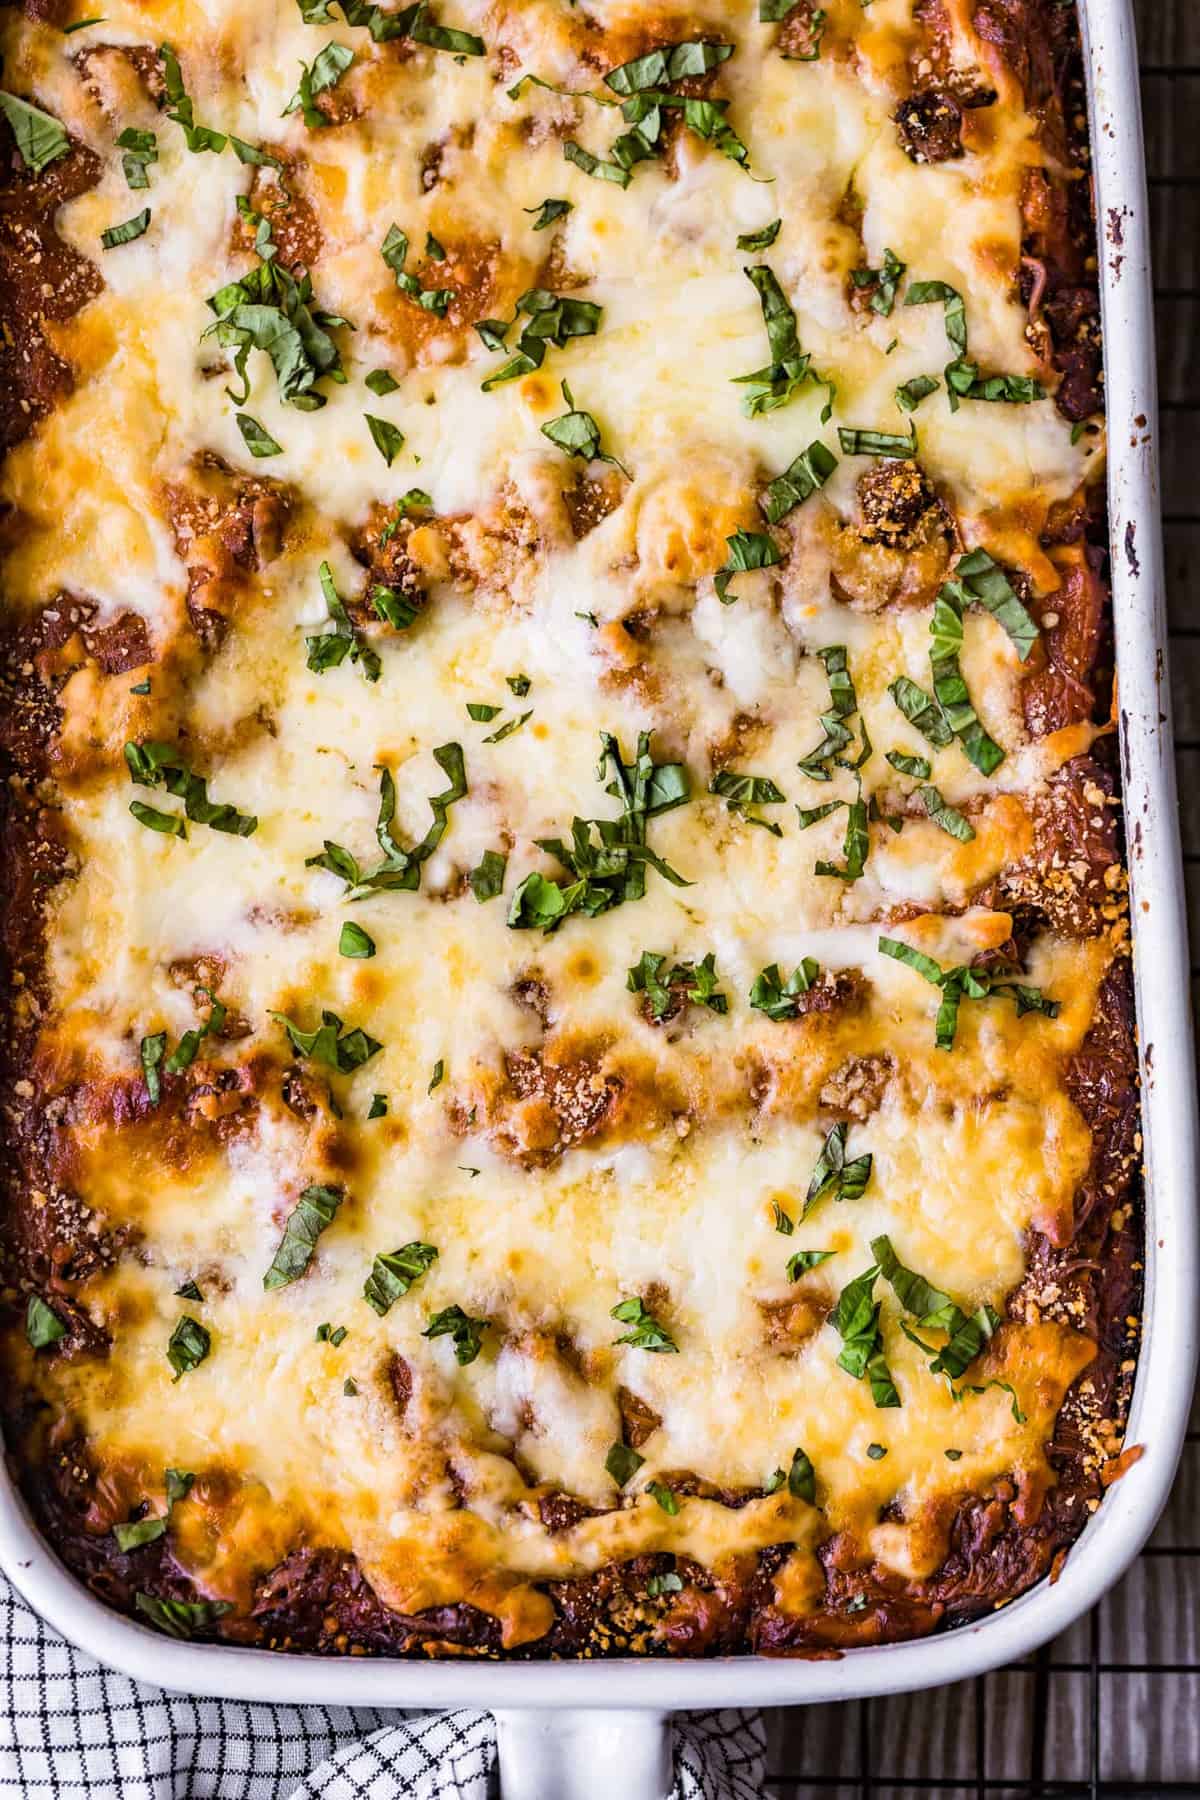 Best Lasagna With Meat Sauce Recipe The Cookie Rookie®